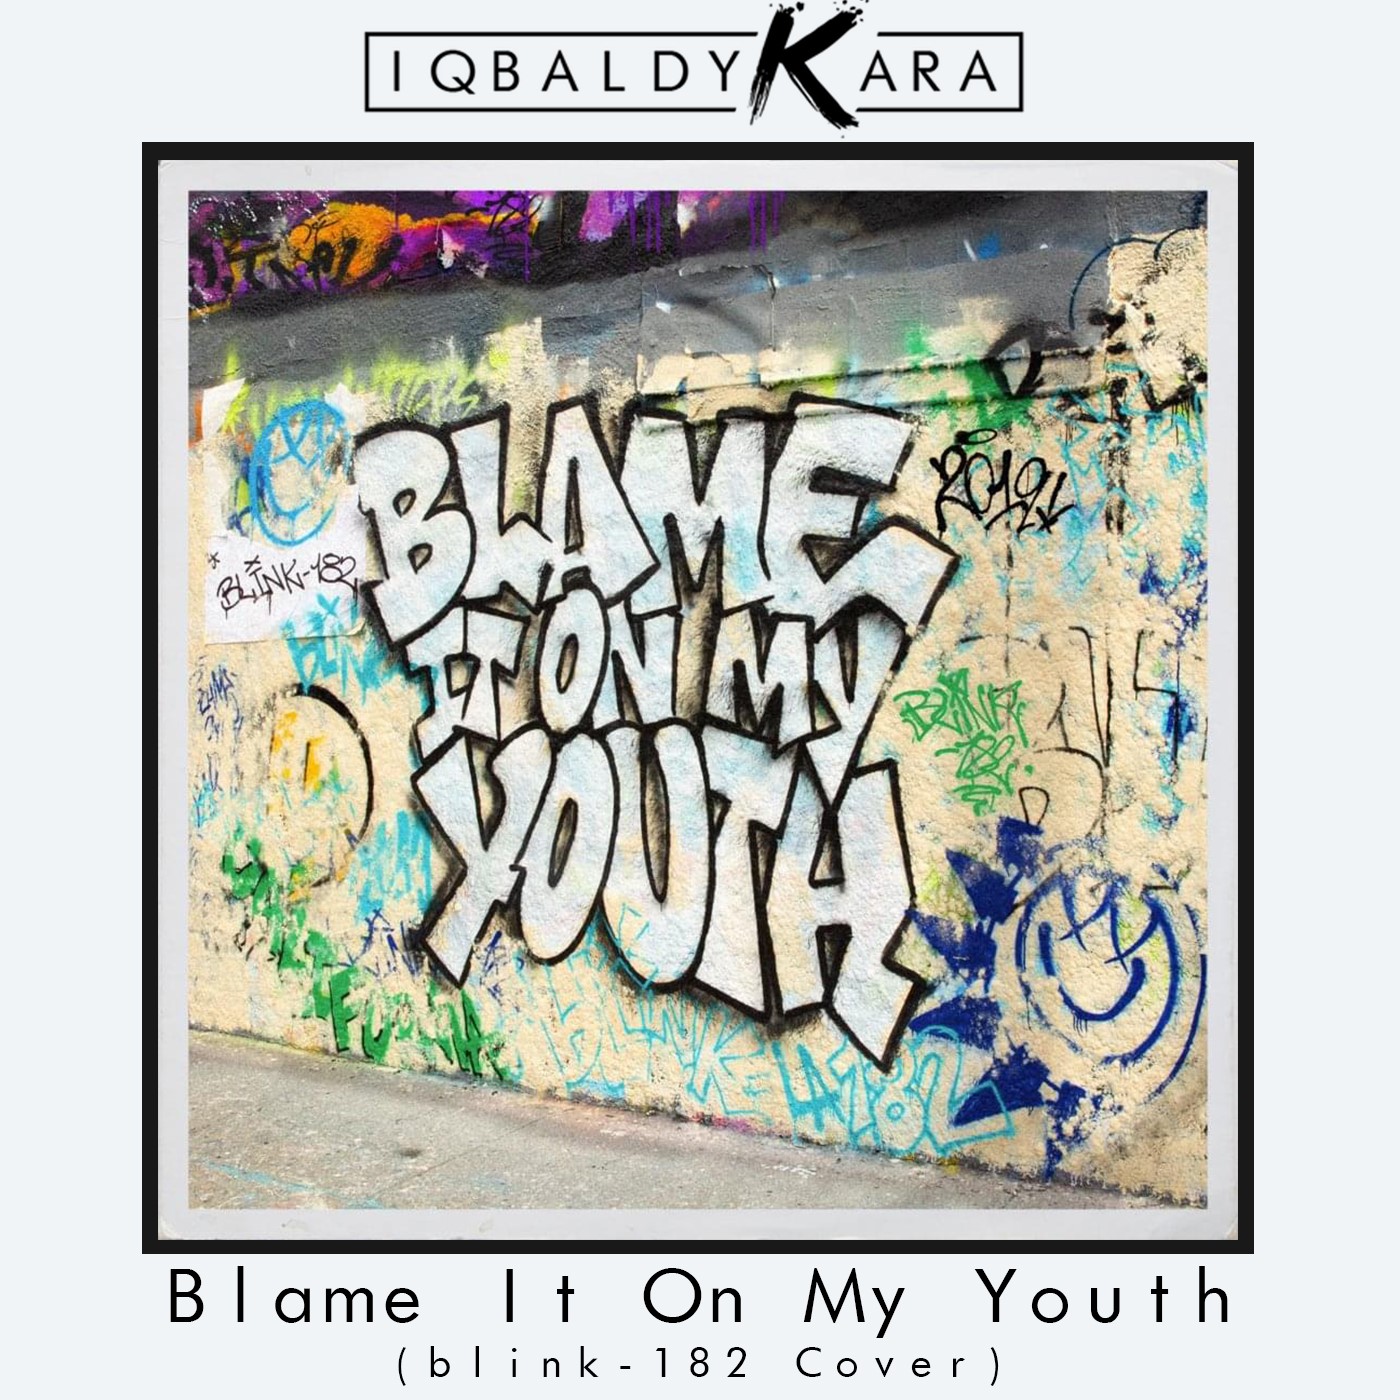 Stiahnuť ▼ Blame It On My Youth (blink-182 Cover)